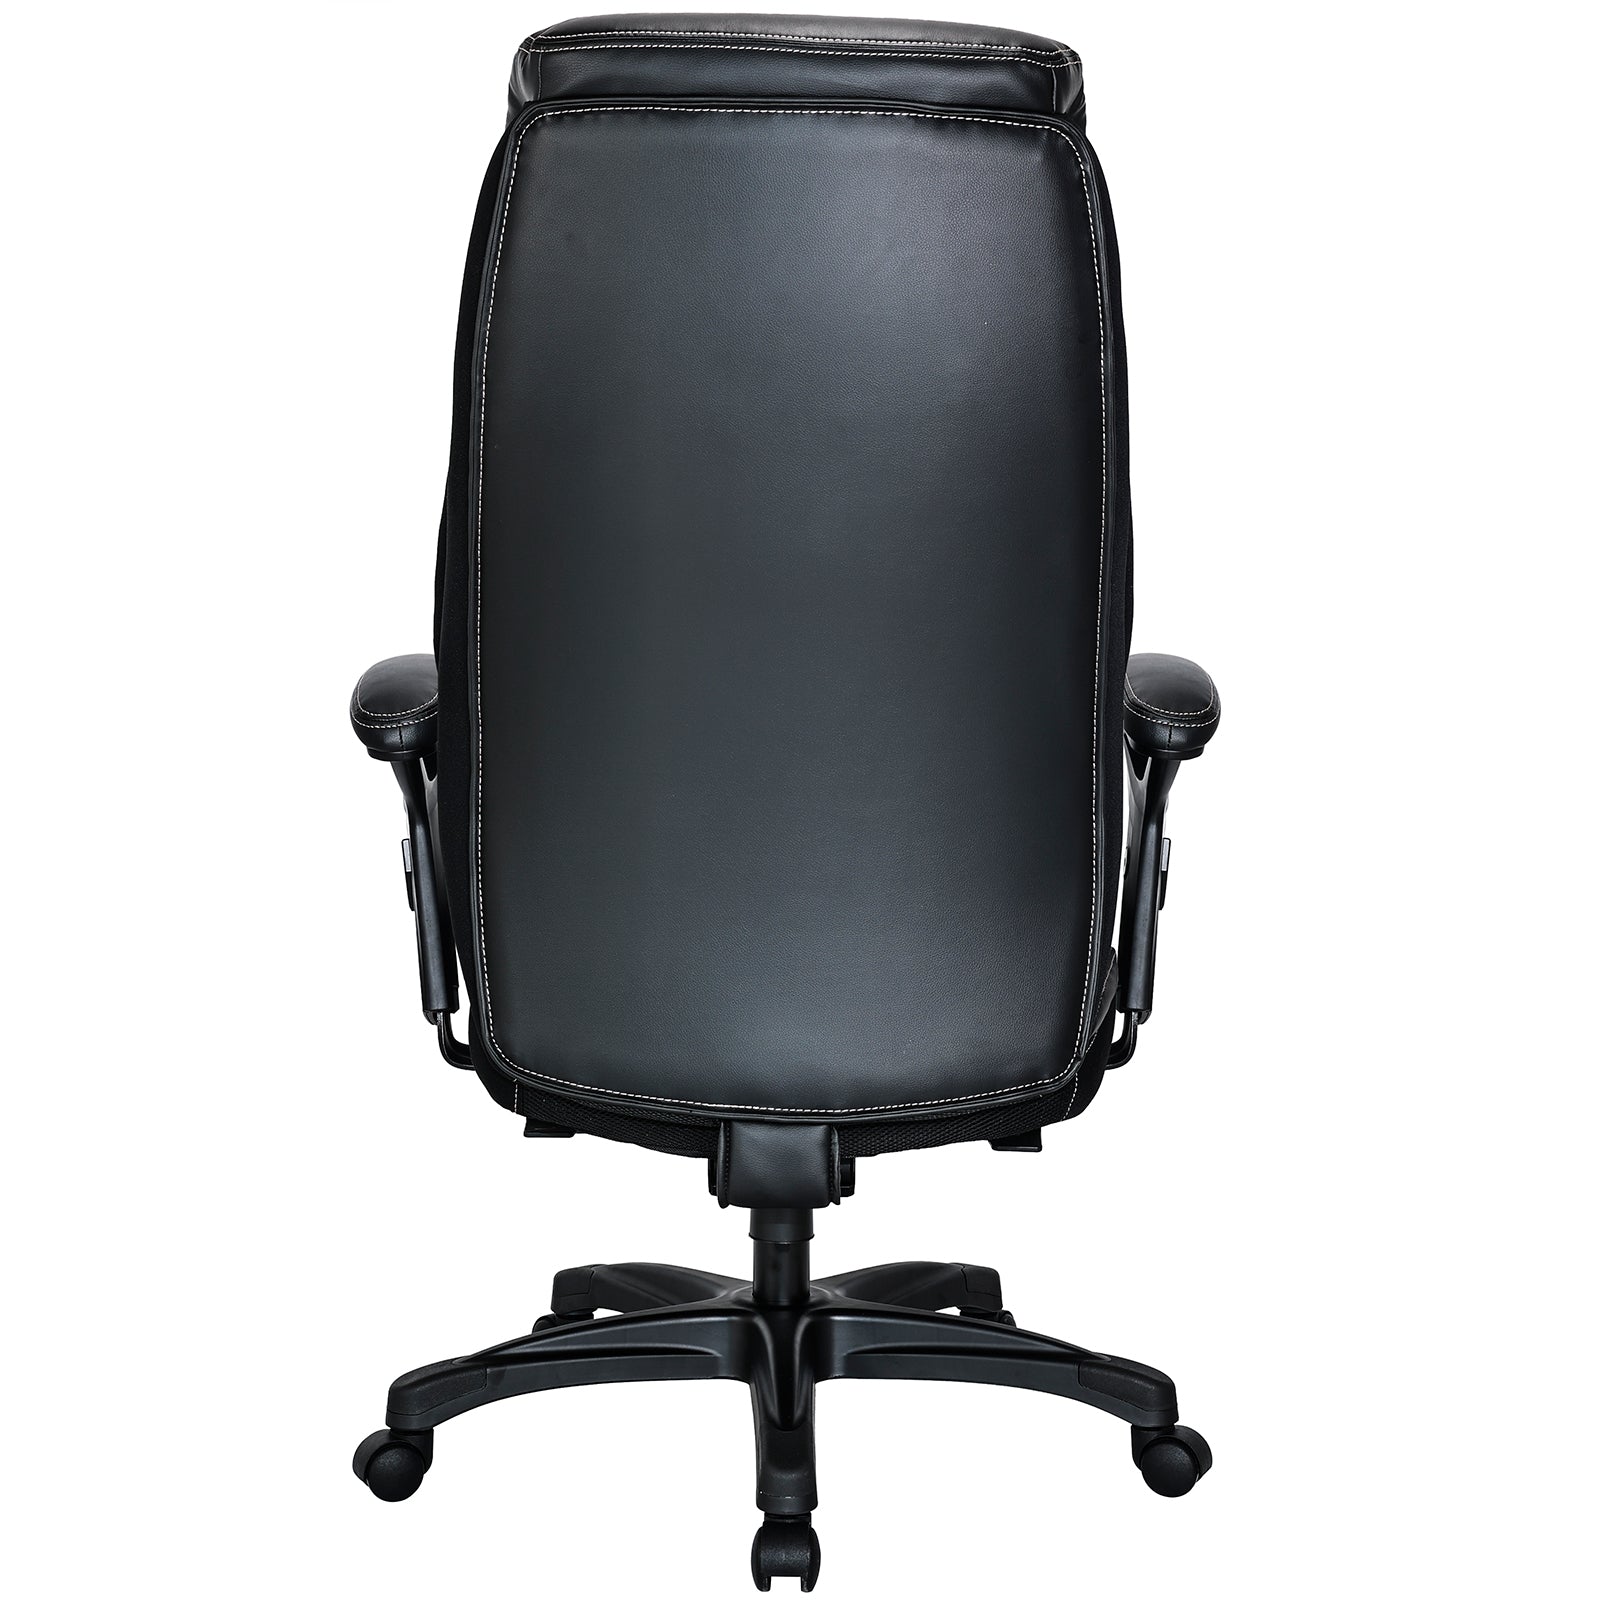 VOFFOV® Big & Tall Executive Office Chair High Back All Day Comfort Ergonomic Lumbar Support, Bonded Leather, Black